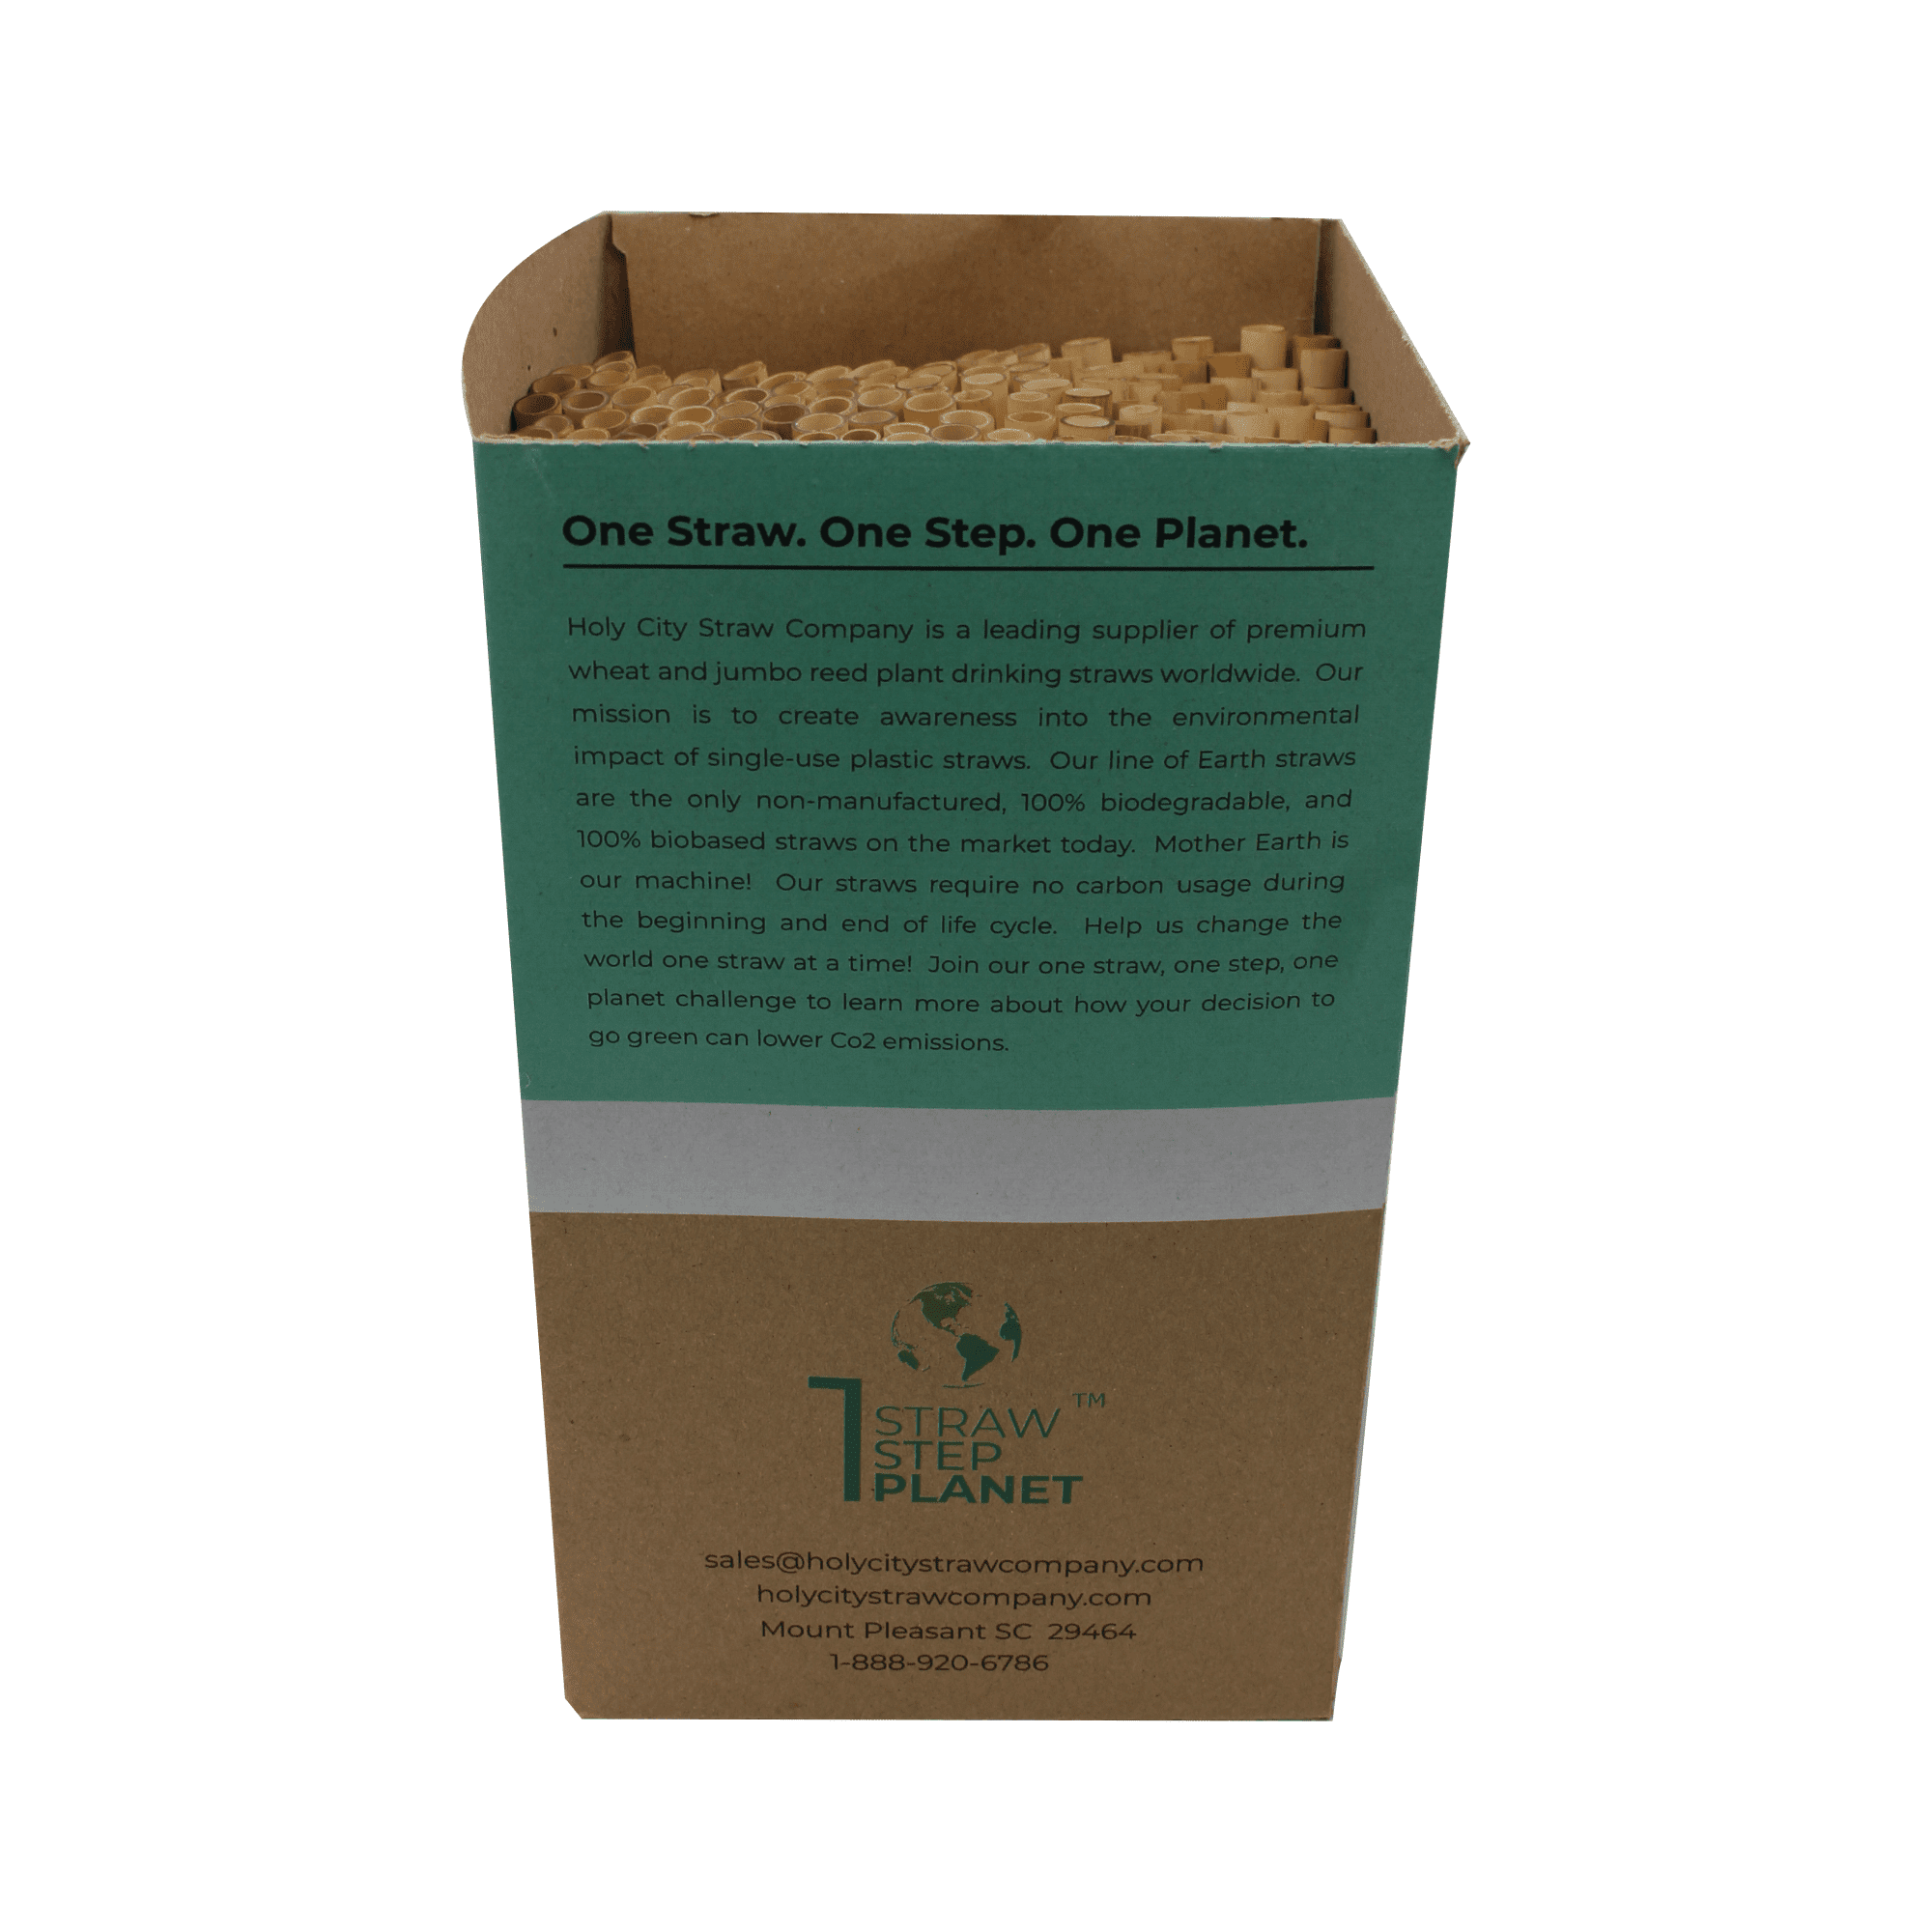 250 count box of Holy City Straw Company Reed Straws with Straws with no top highlighting the One Straw One Step One Plane mantra